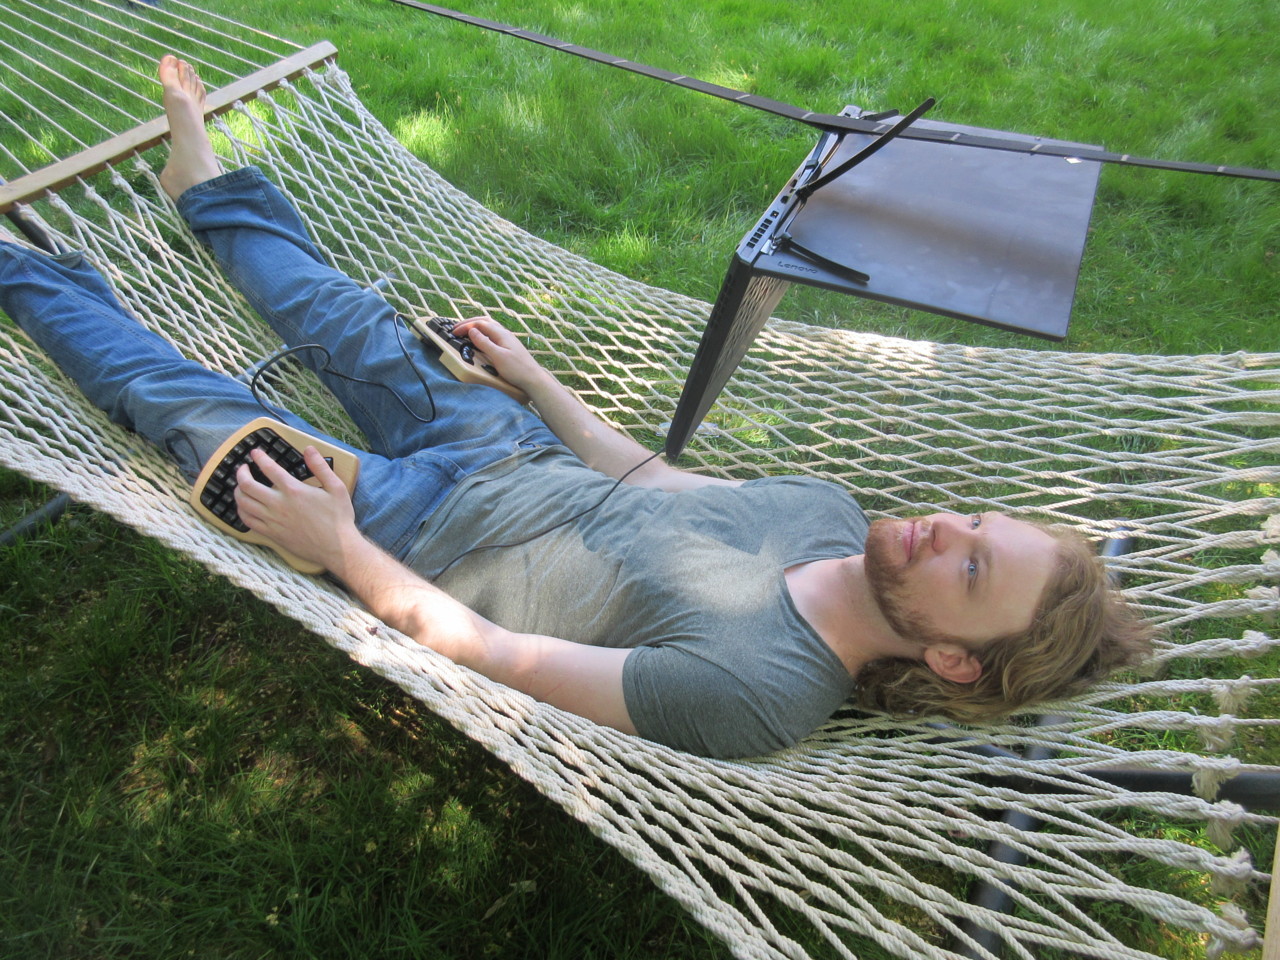 Using a computer ergonomically in a hammock, via external split keyboard and computer suspended above head